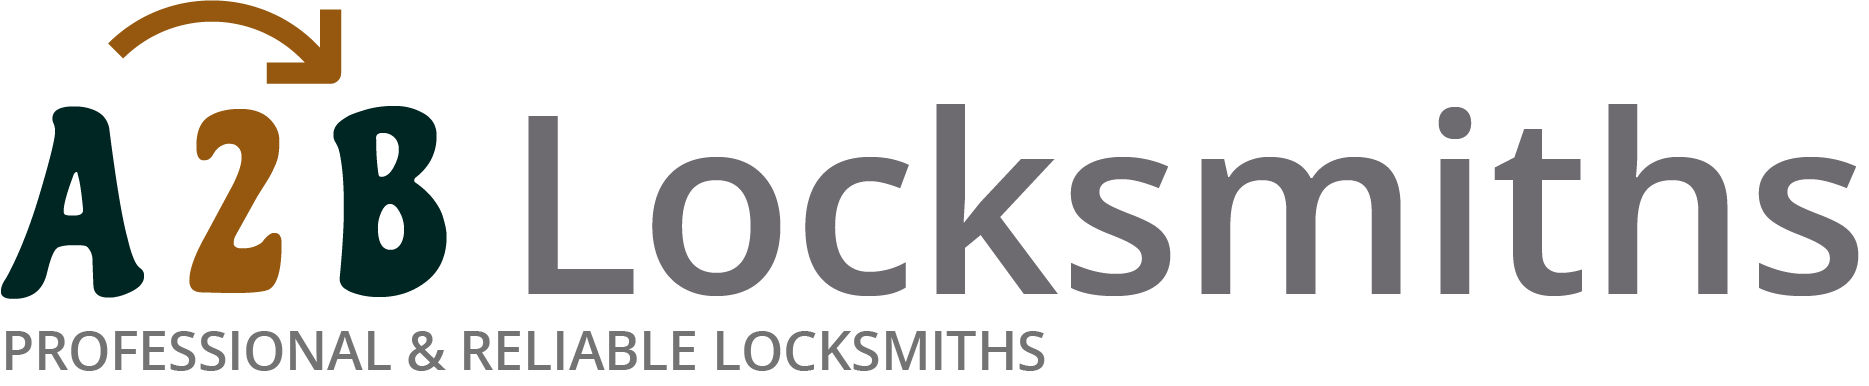 If you are locked out of house in Lofthouse, our 24/7 local emergency locksmith services can help you.